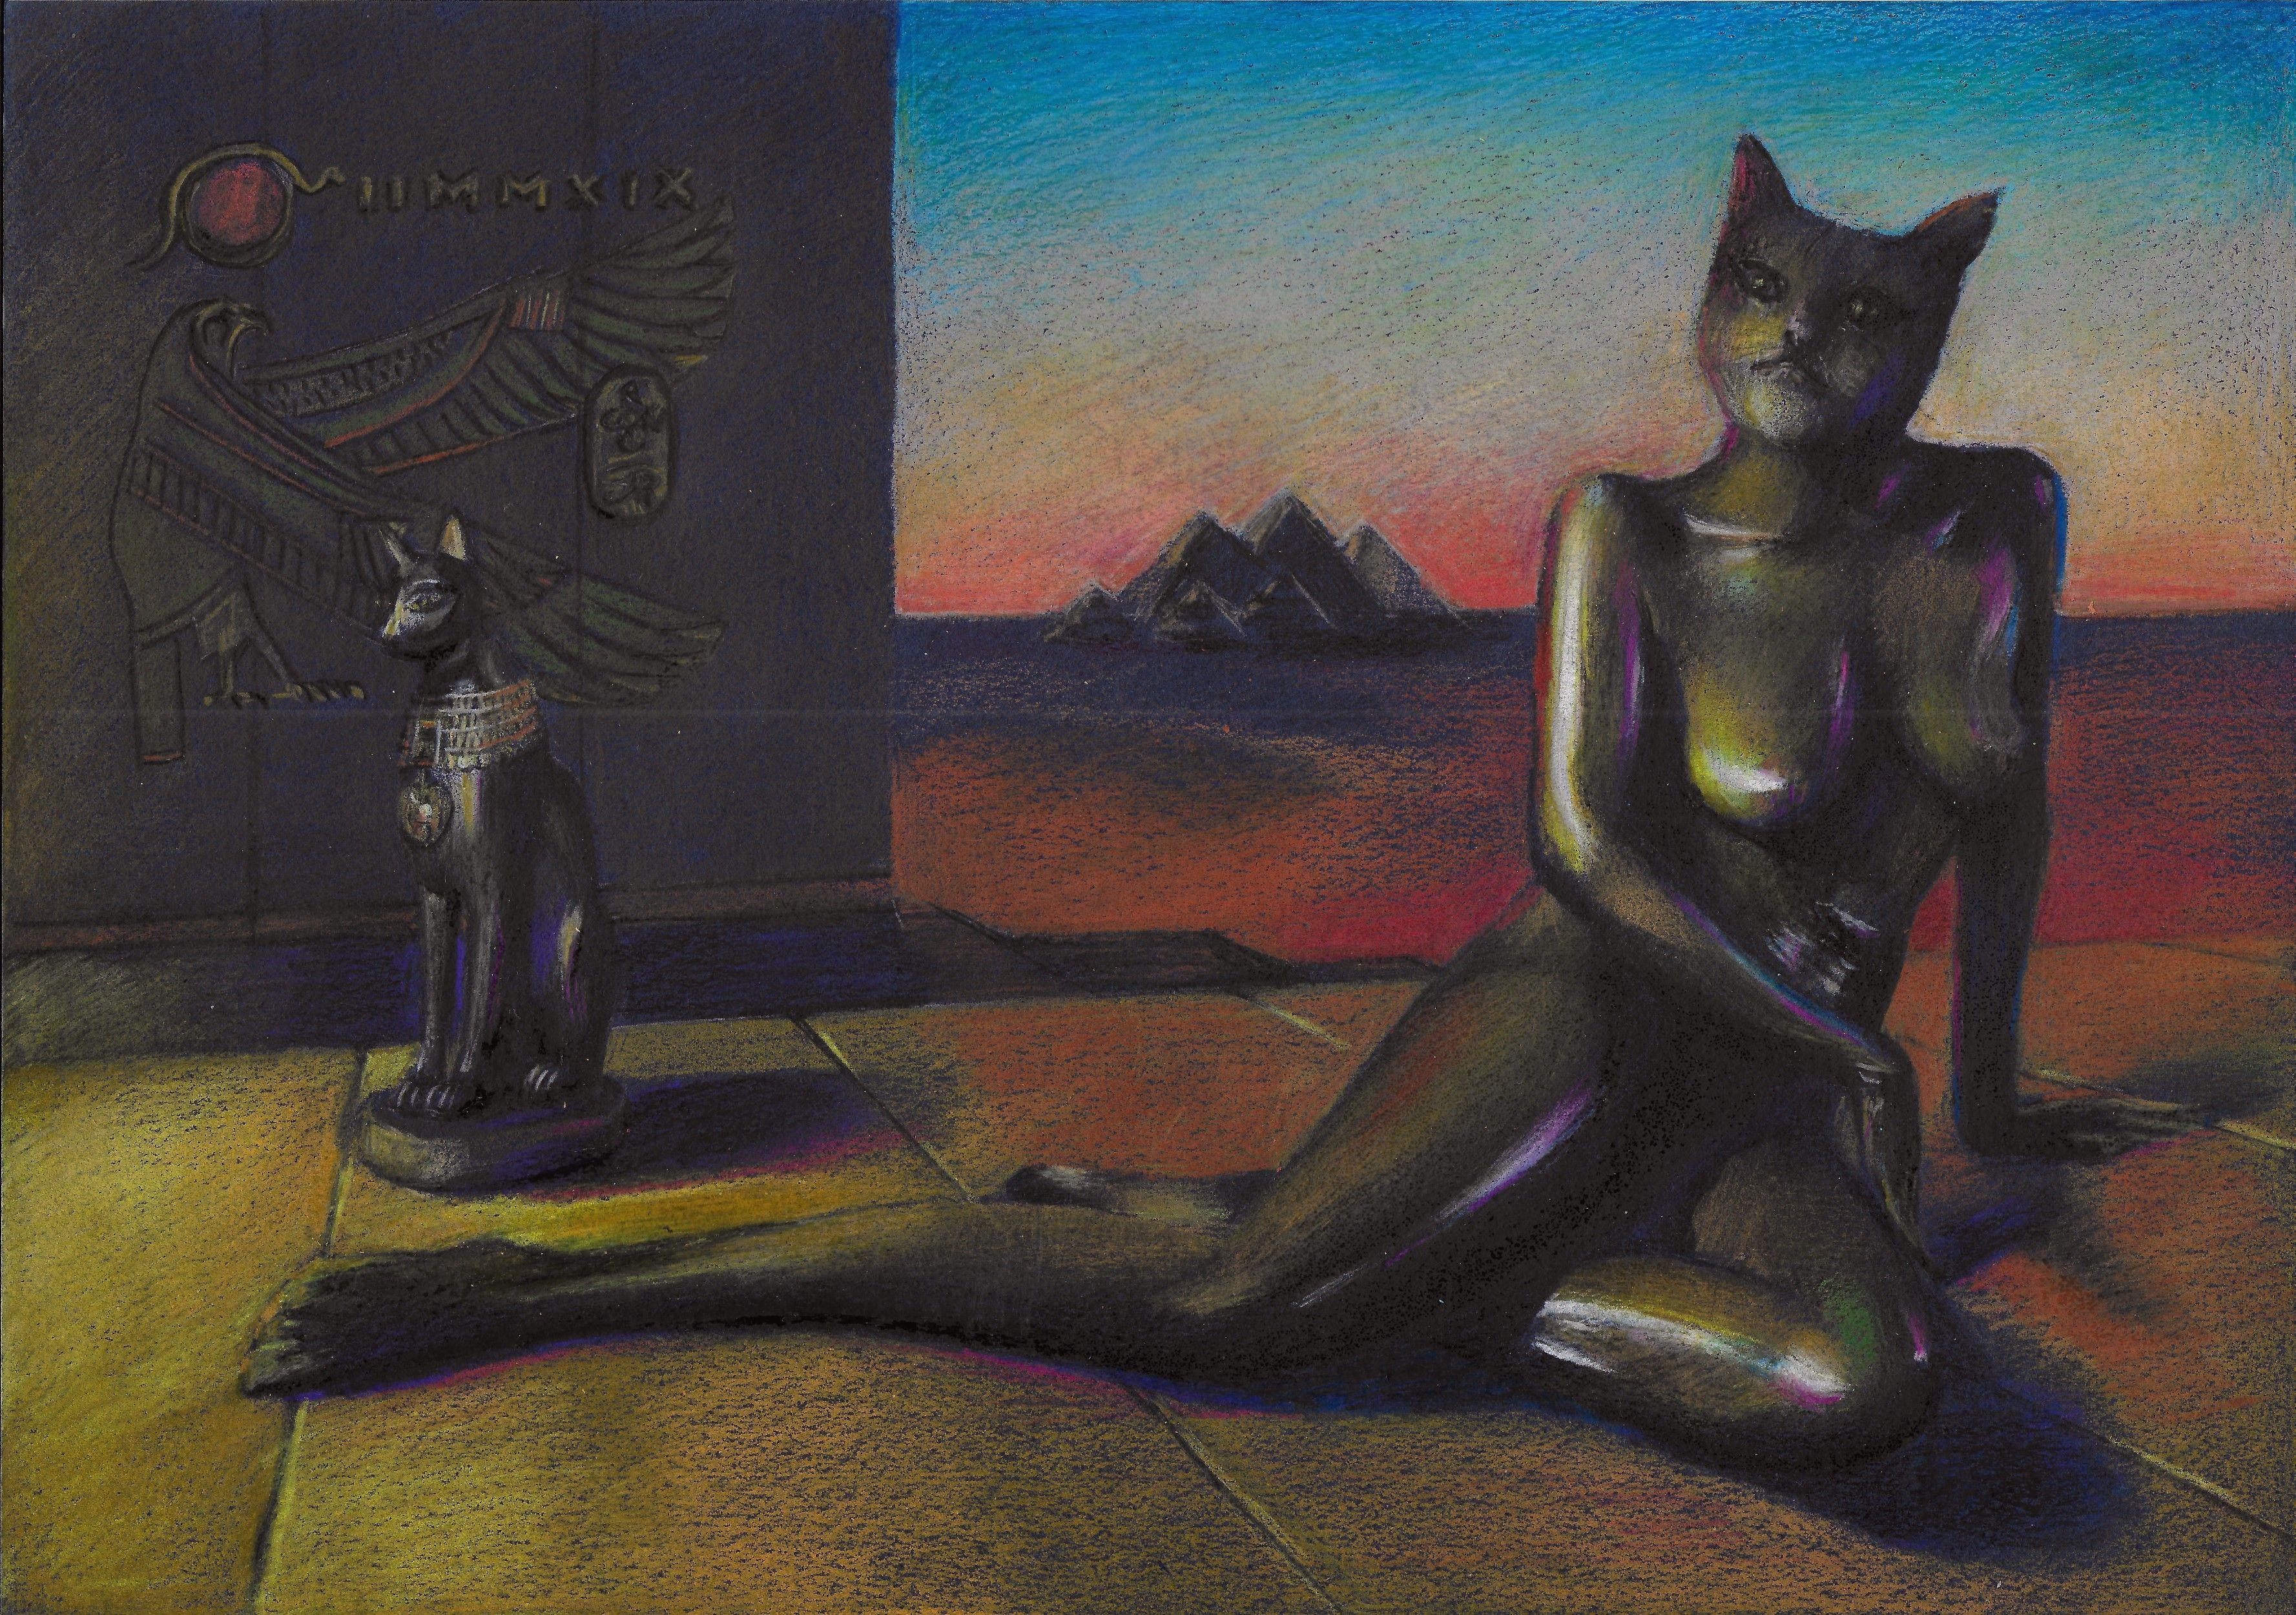 Bastet â€“ 01-01-19, Drawing, Pencil/Colored Pencil on Paper - Art by Corne Akkers